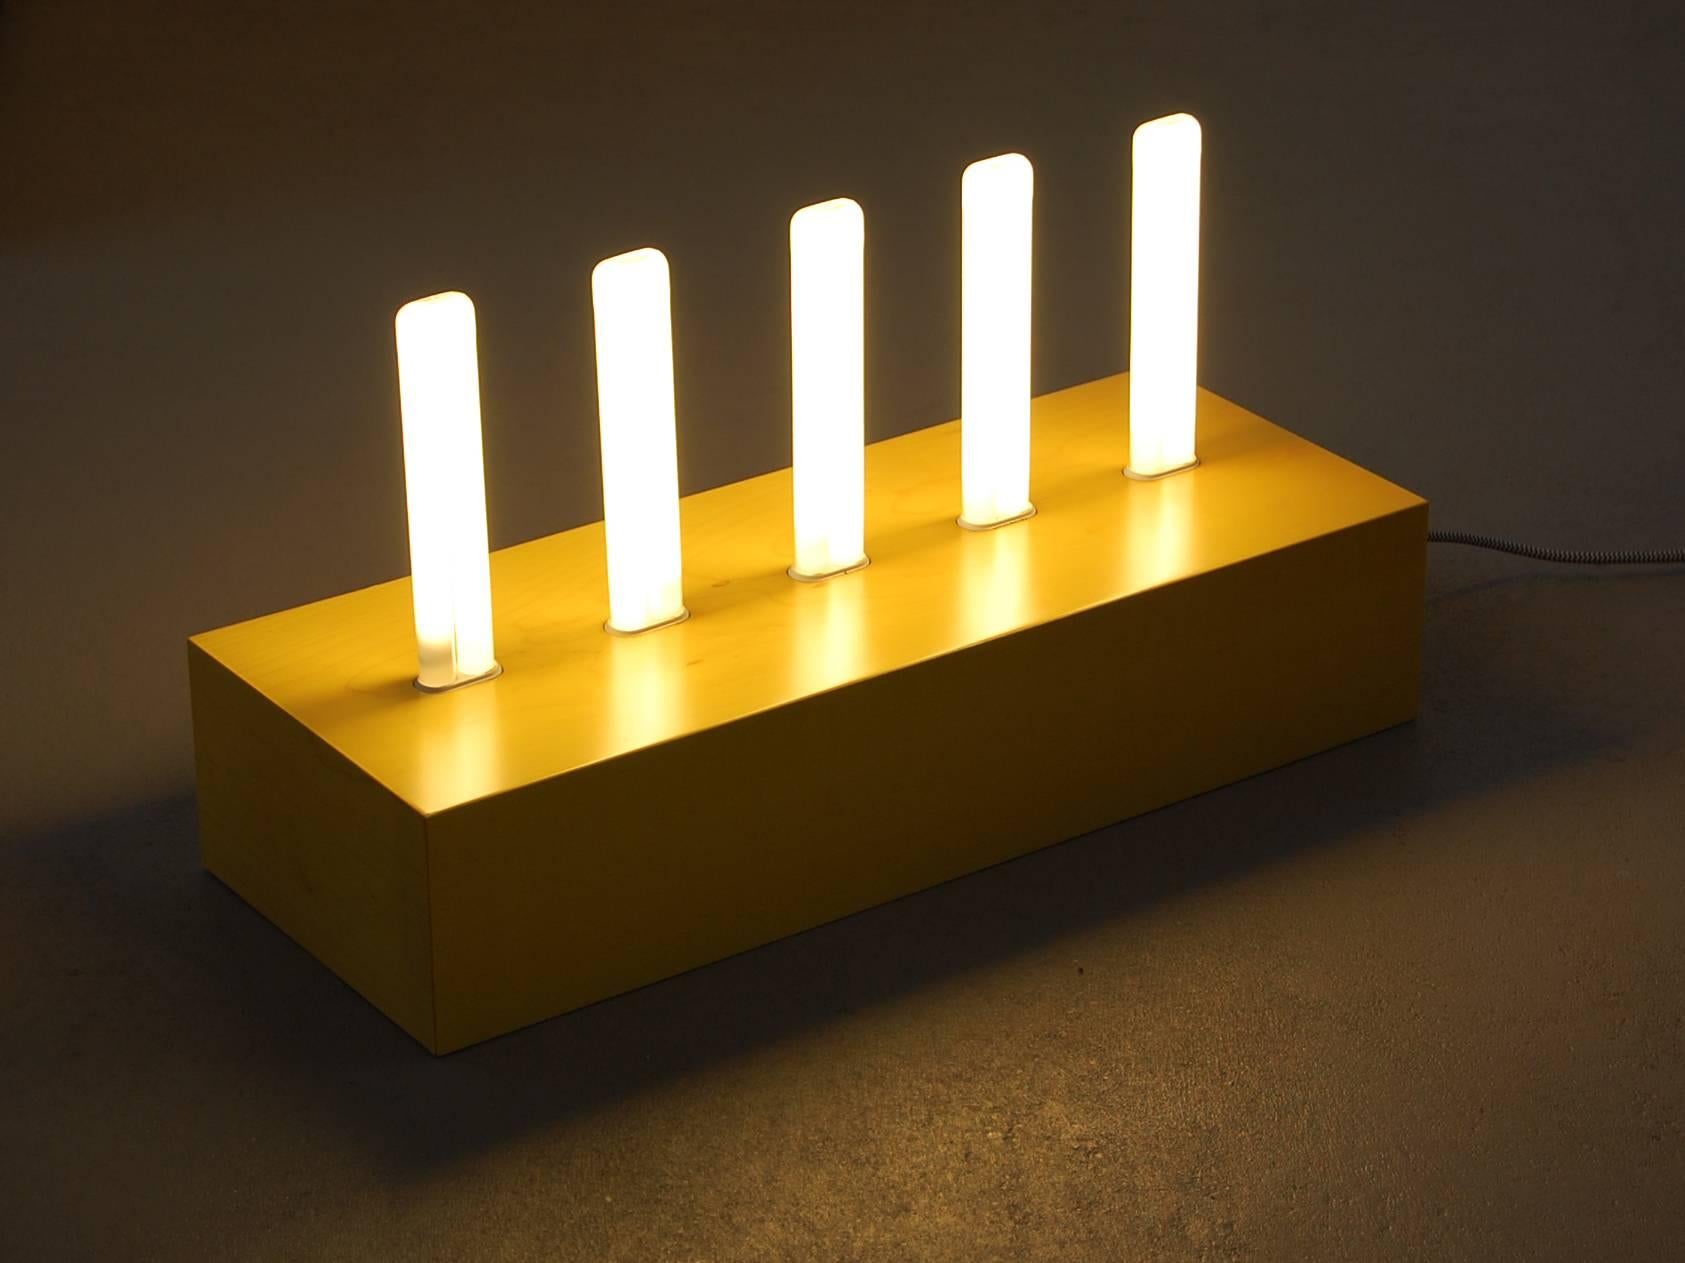 Ettore Sottsass
Post design (Memphis), Milan, Italy.

‘Pattica’ lamp, 2000.

Yellow dyed maple base with five florescent lamps.
Original box.

Fully function, supplied complete with all light bulbs.

As much a work of art as it is a lamp, this can